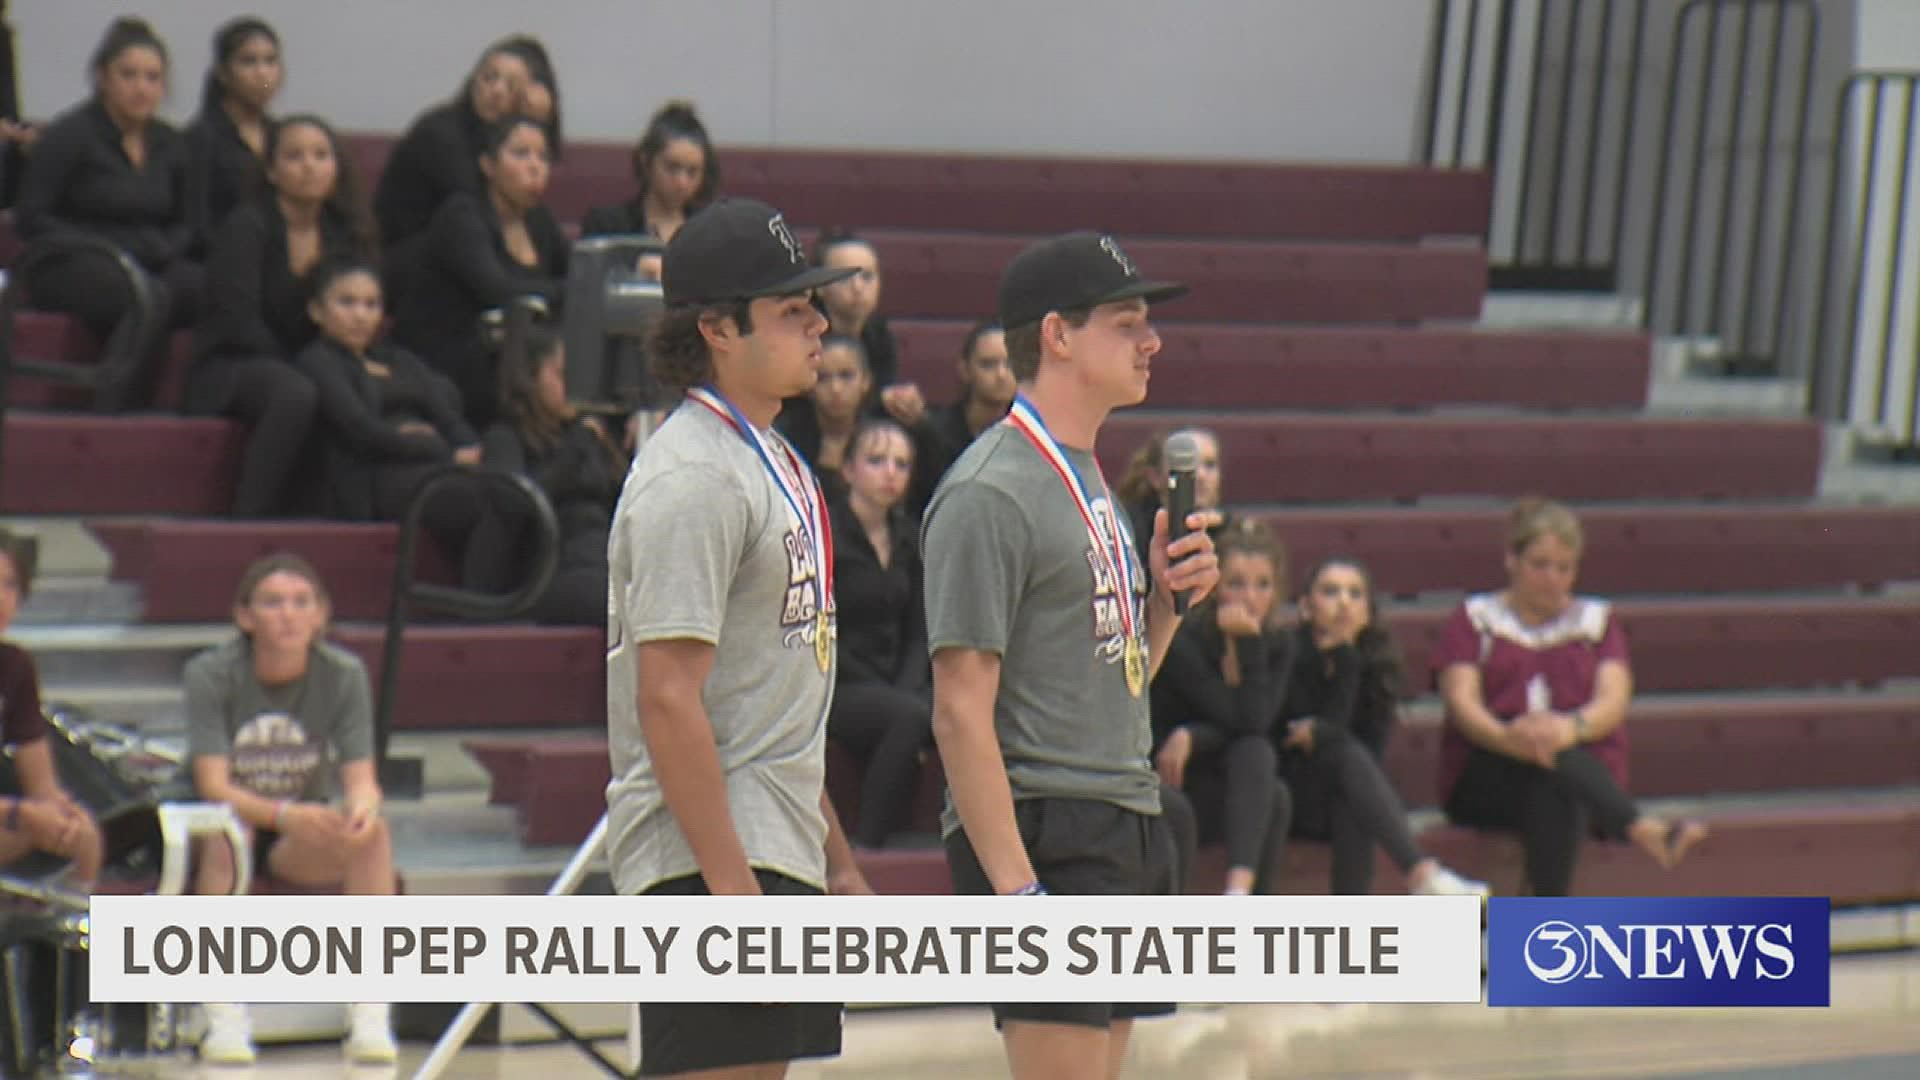 The Pirates held the pep rally Wednesday with school having started back up for London and many of the players back from summer select ball.